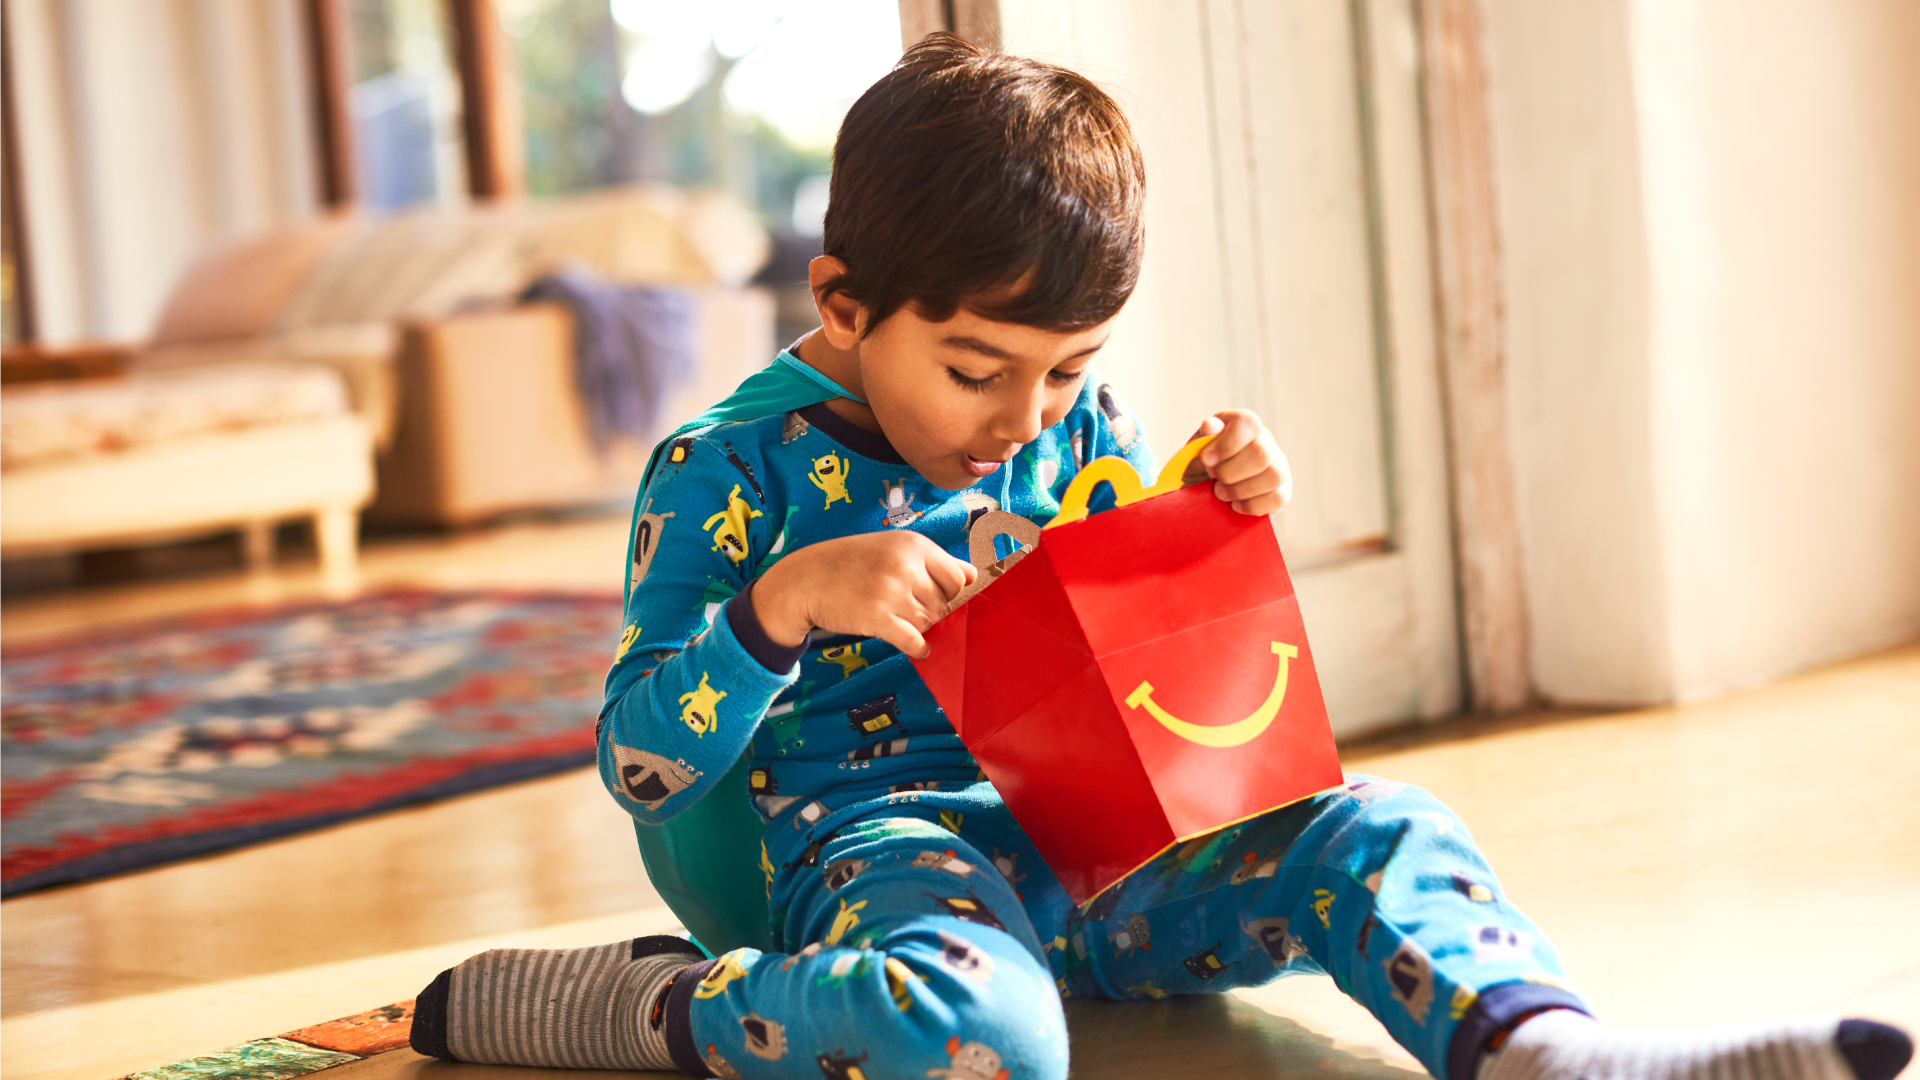 We relaunched Happy Meal Readers, democratizing access to children’s literature in Latin America